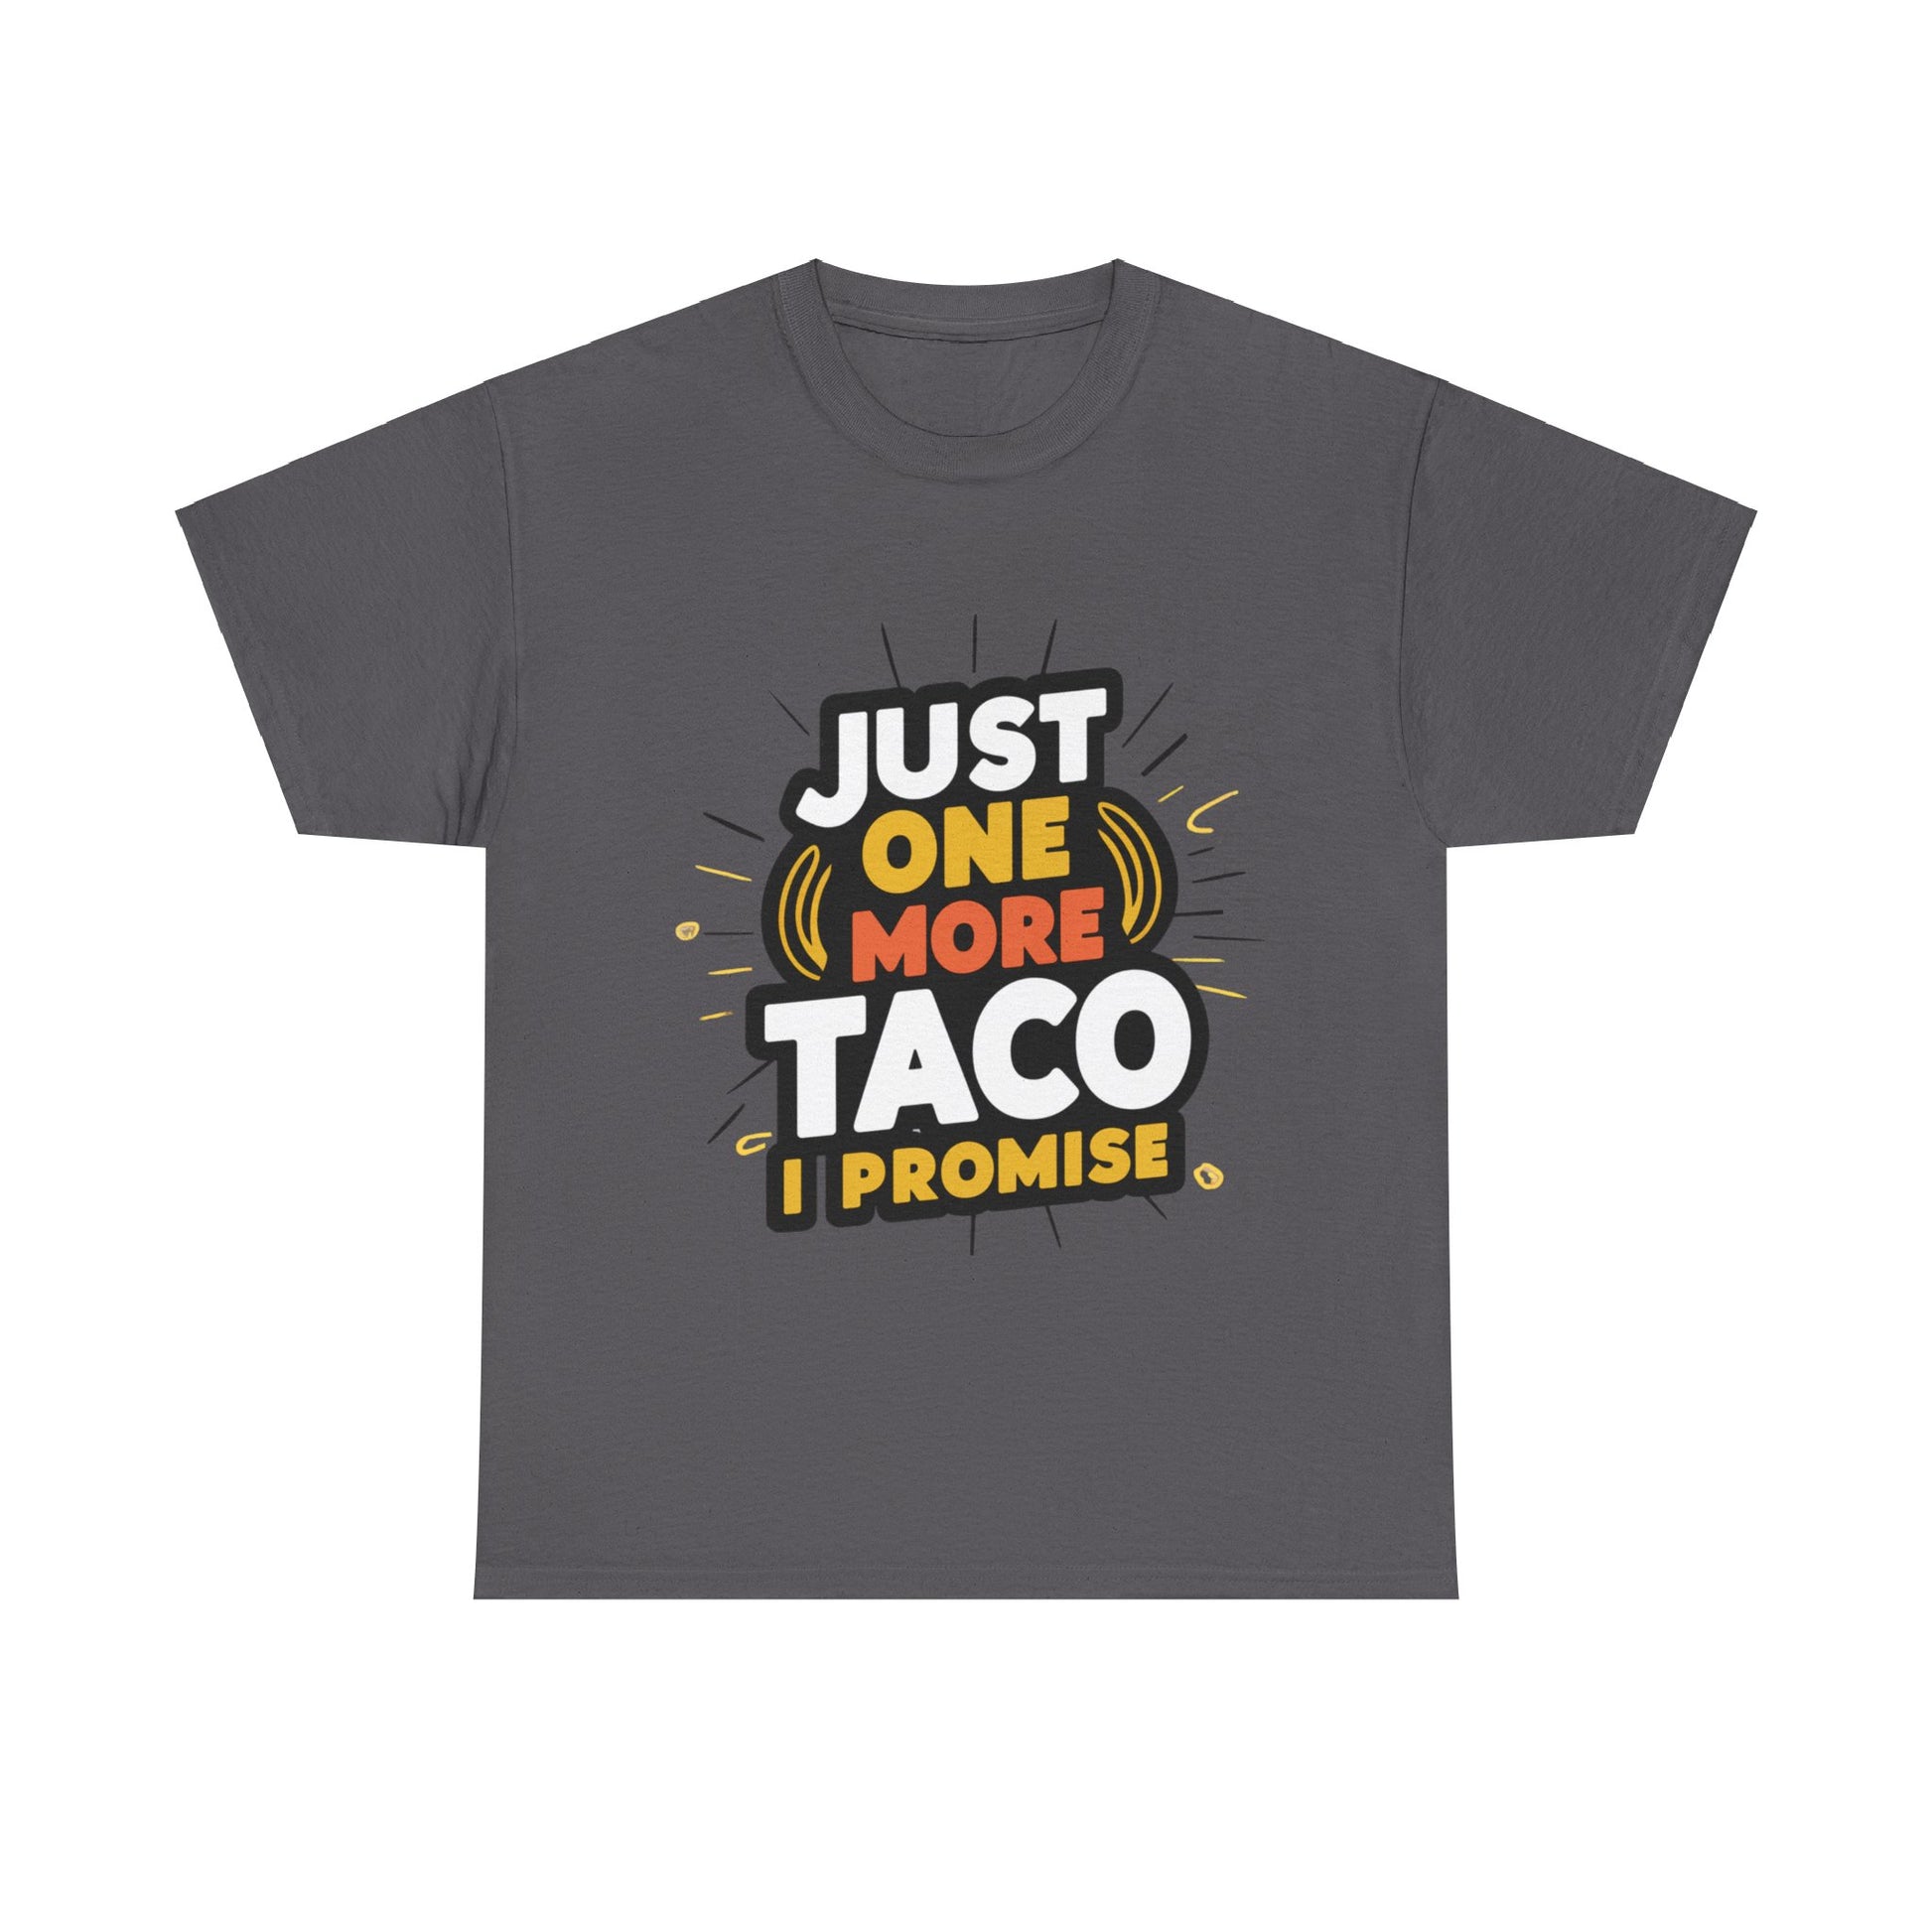 Just One More Taco I Promise Mexican Food Graphic Unisex Heavy Cotton Tee Cotton Funny Humorous Graphic Soft Premium Unisex Men Women Charcoal T-shirt Birthday Gift-2